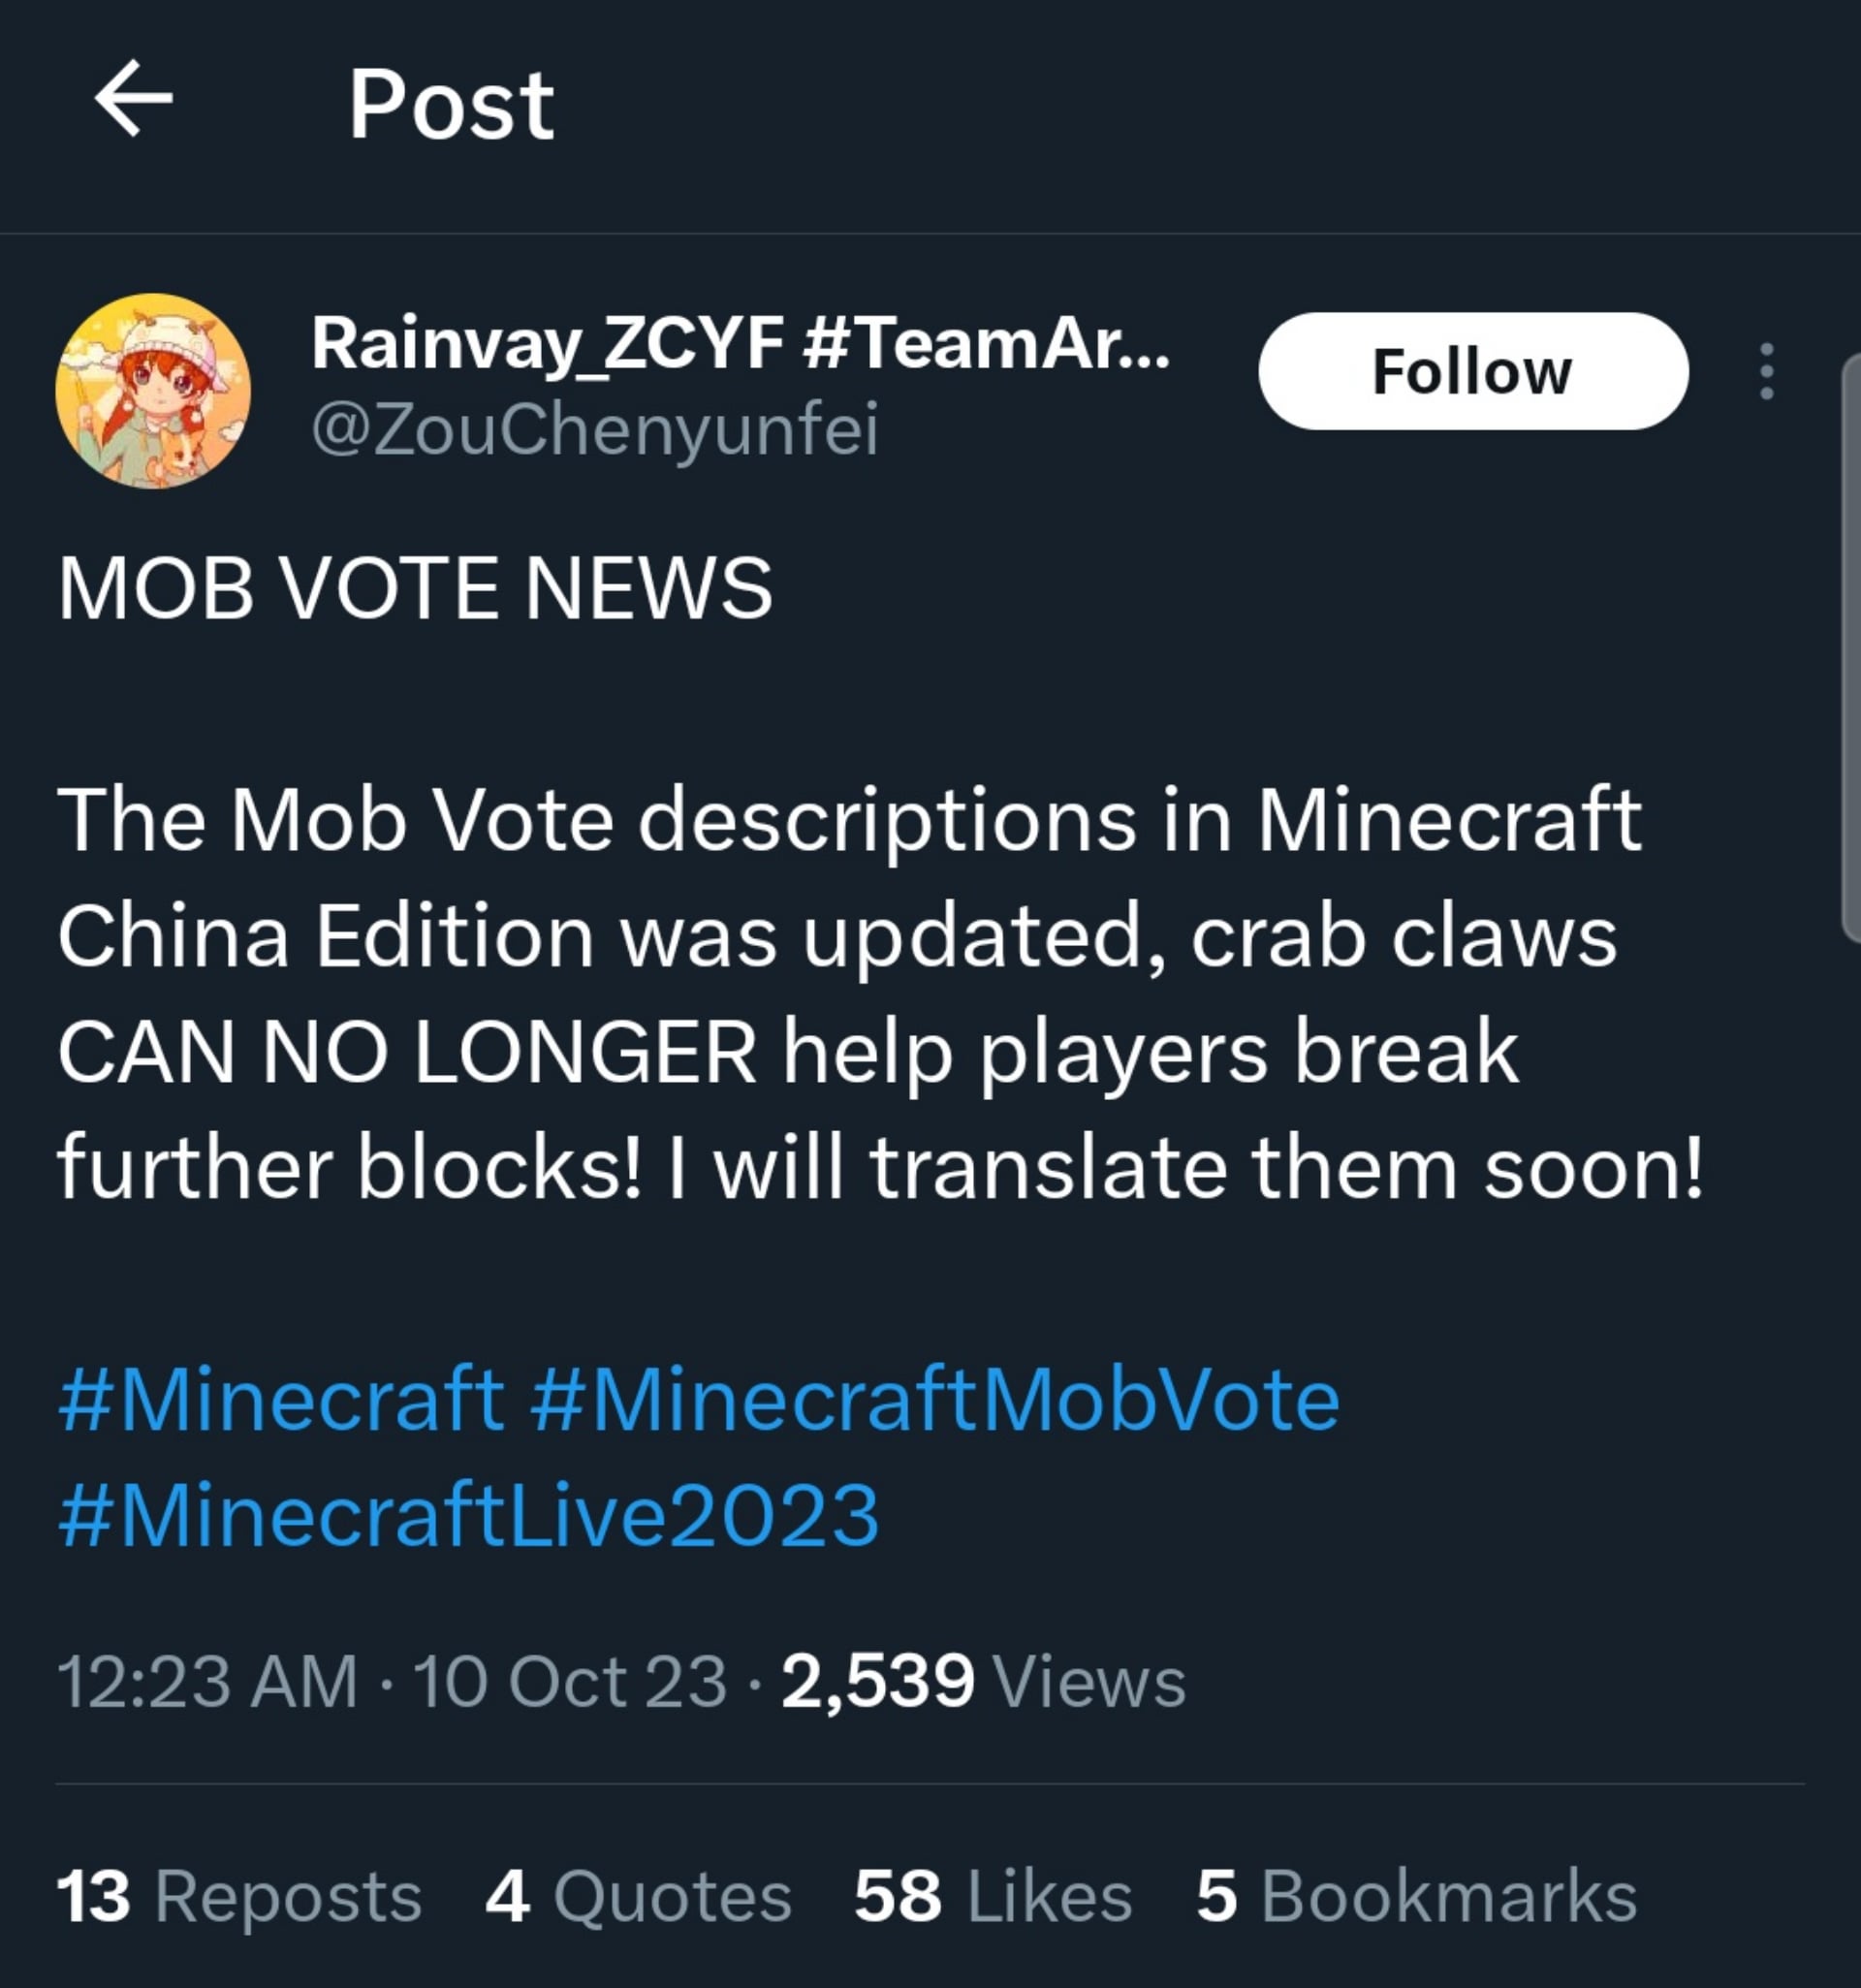 Minecraft Memes - Crab claws no longer confirmed to break blocks further away